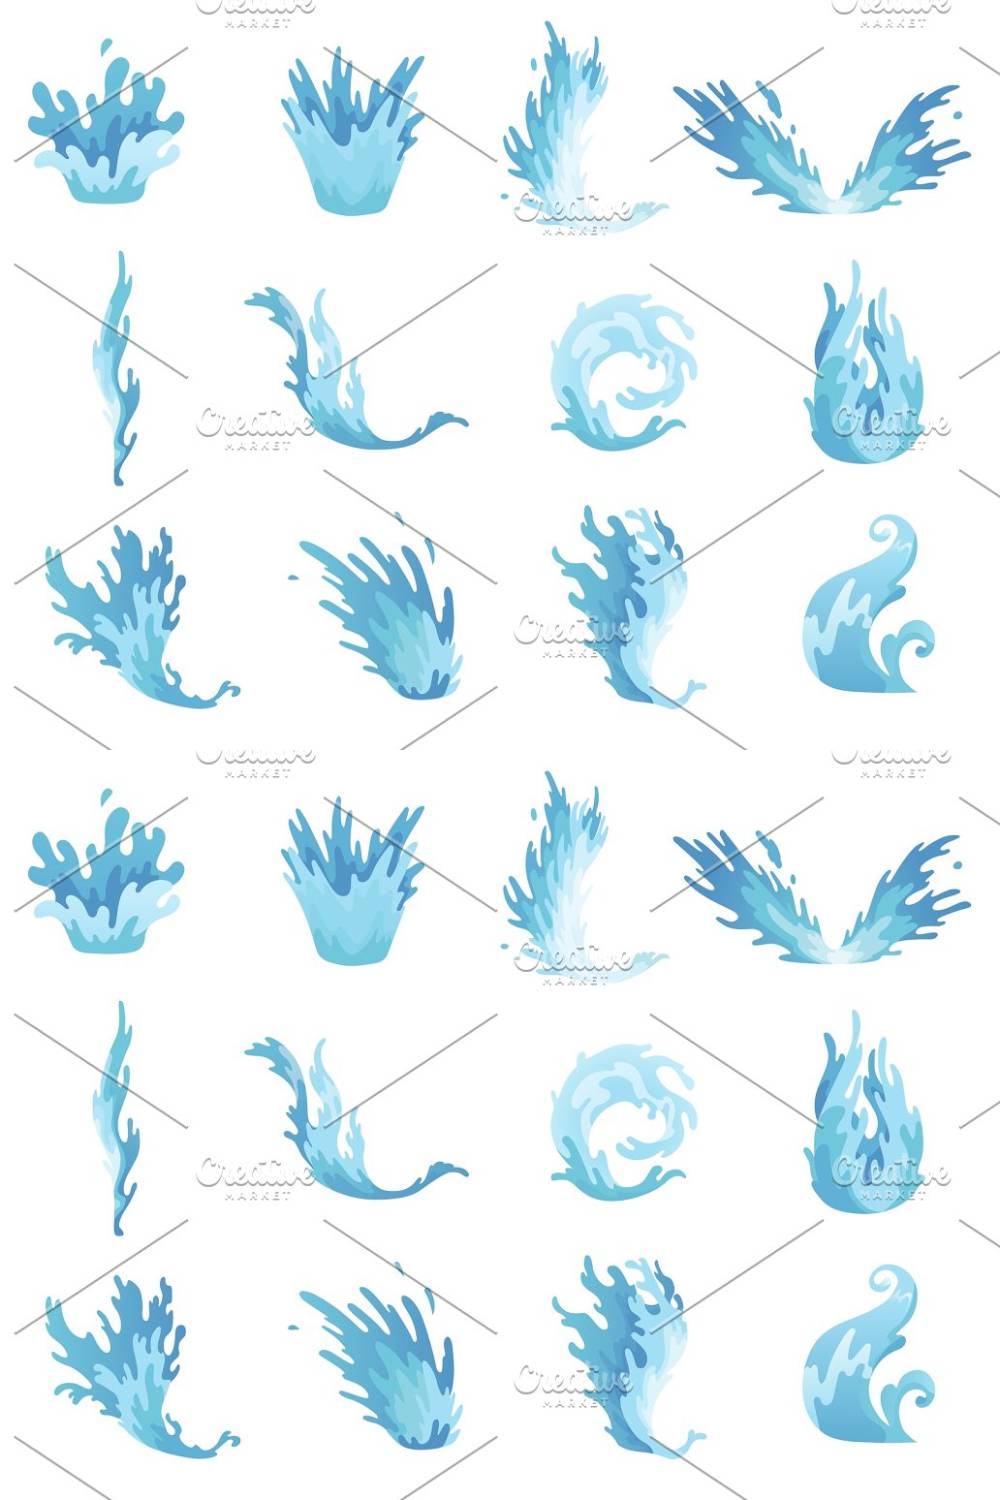 Water Splashes. Blue Water Waves Set Pinterest Cover.